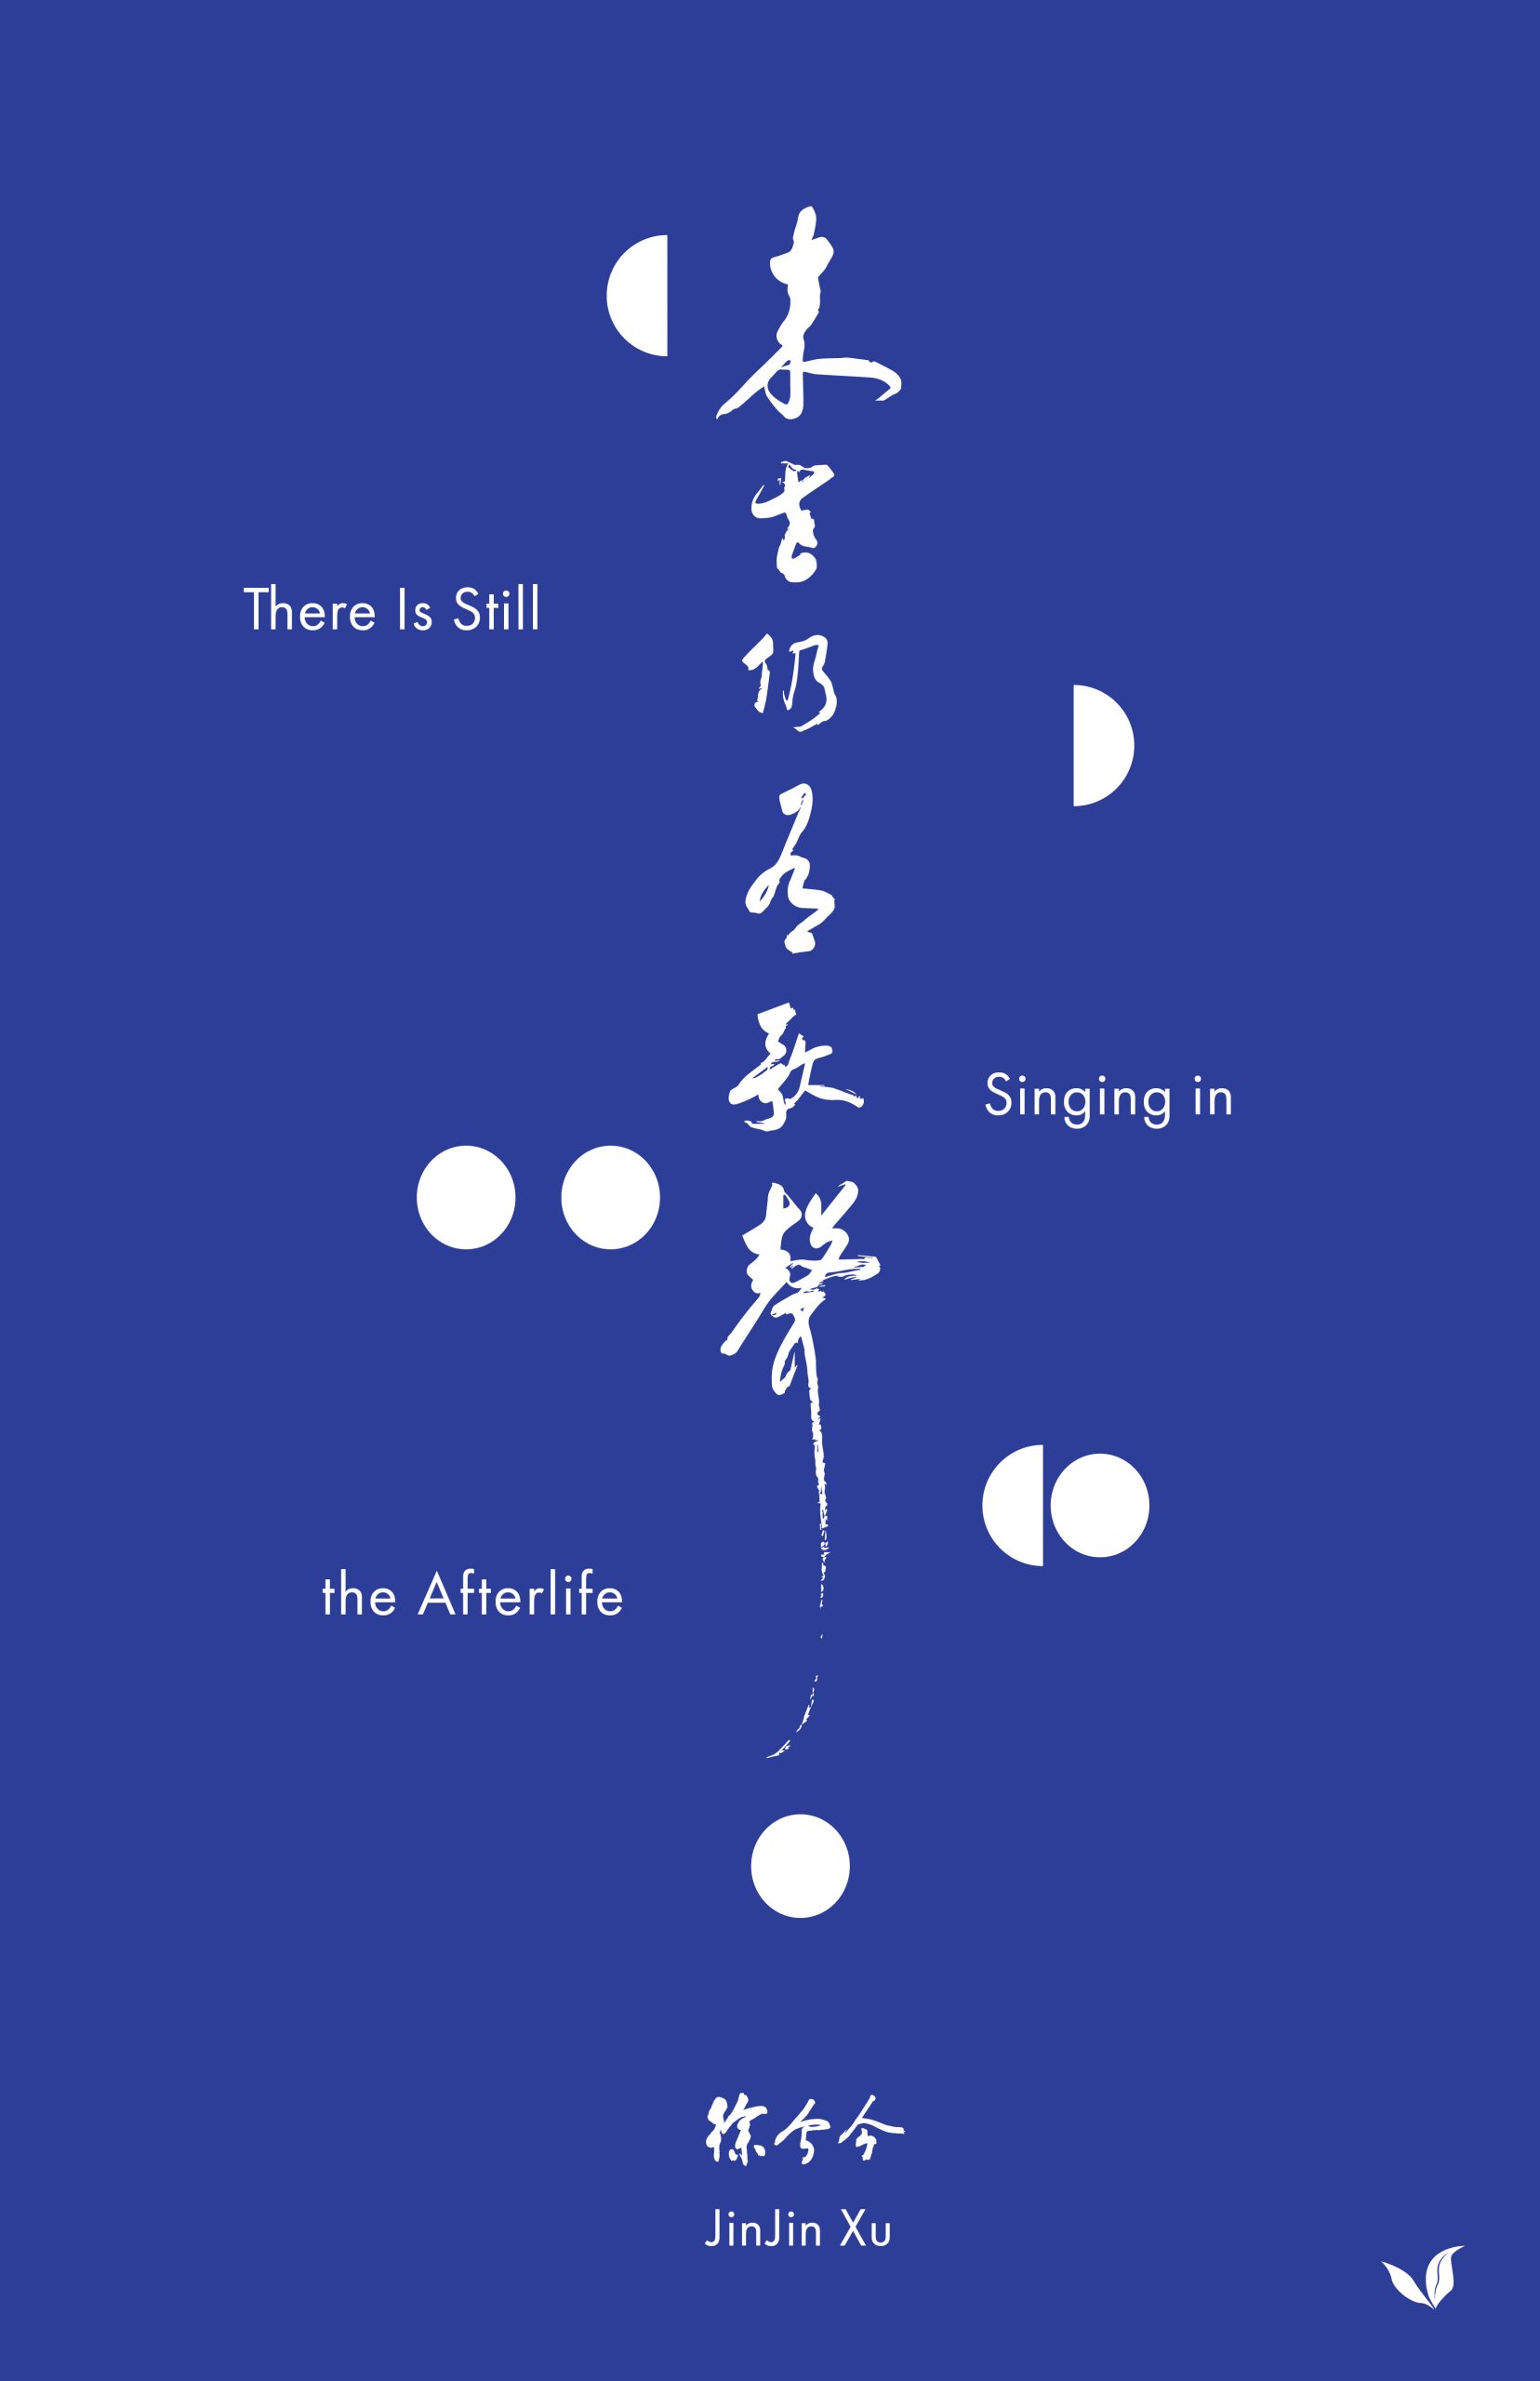 Review: There is Still Singing in the Afterlife by JinJin Xu